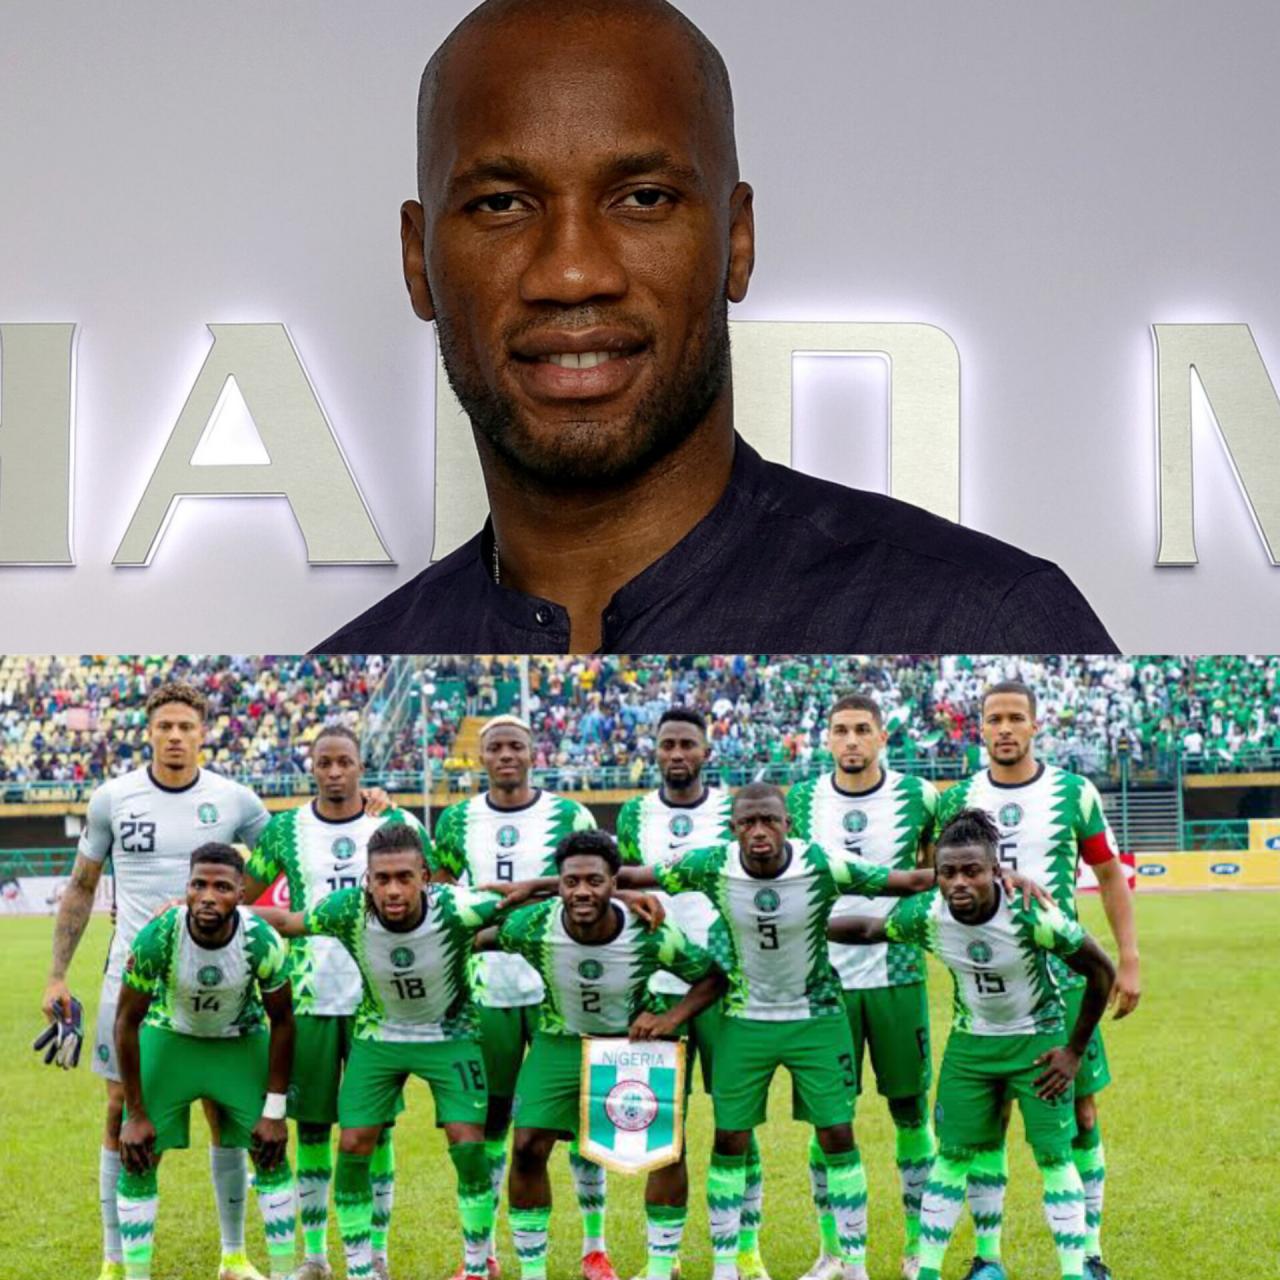 AFCON 2023: "Nigeria, with Victor Osimhen is a big team"- Didier Drogba warns of Super Eagles threat ahead of games